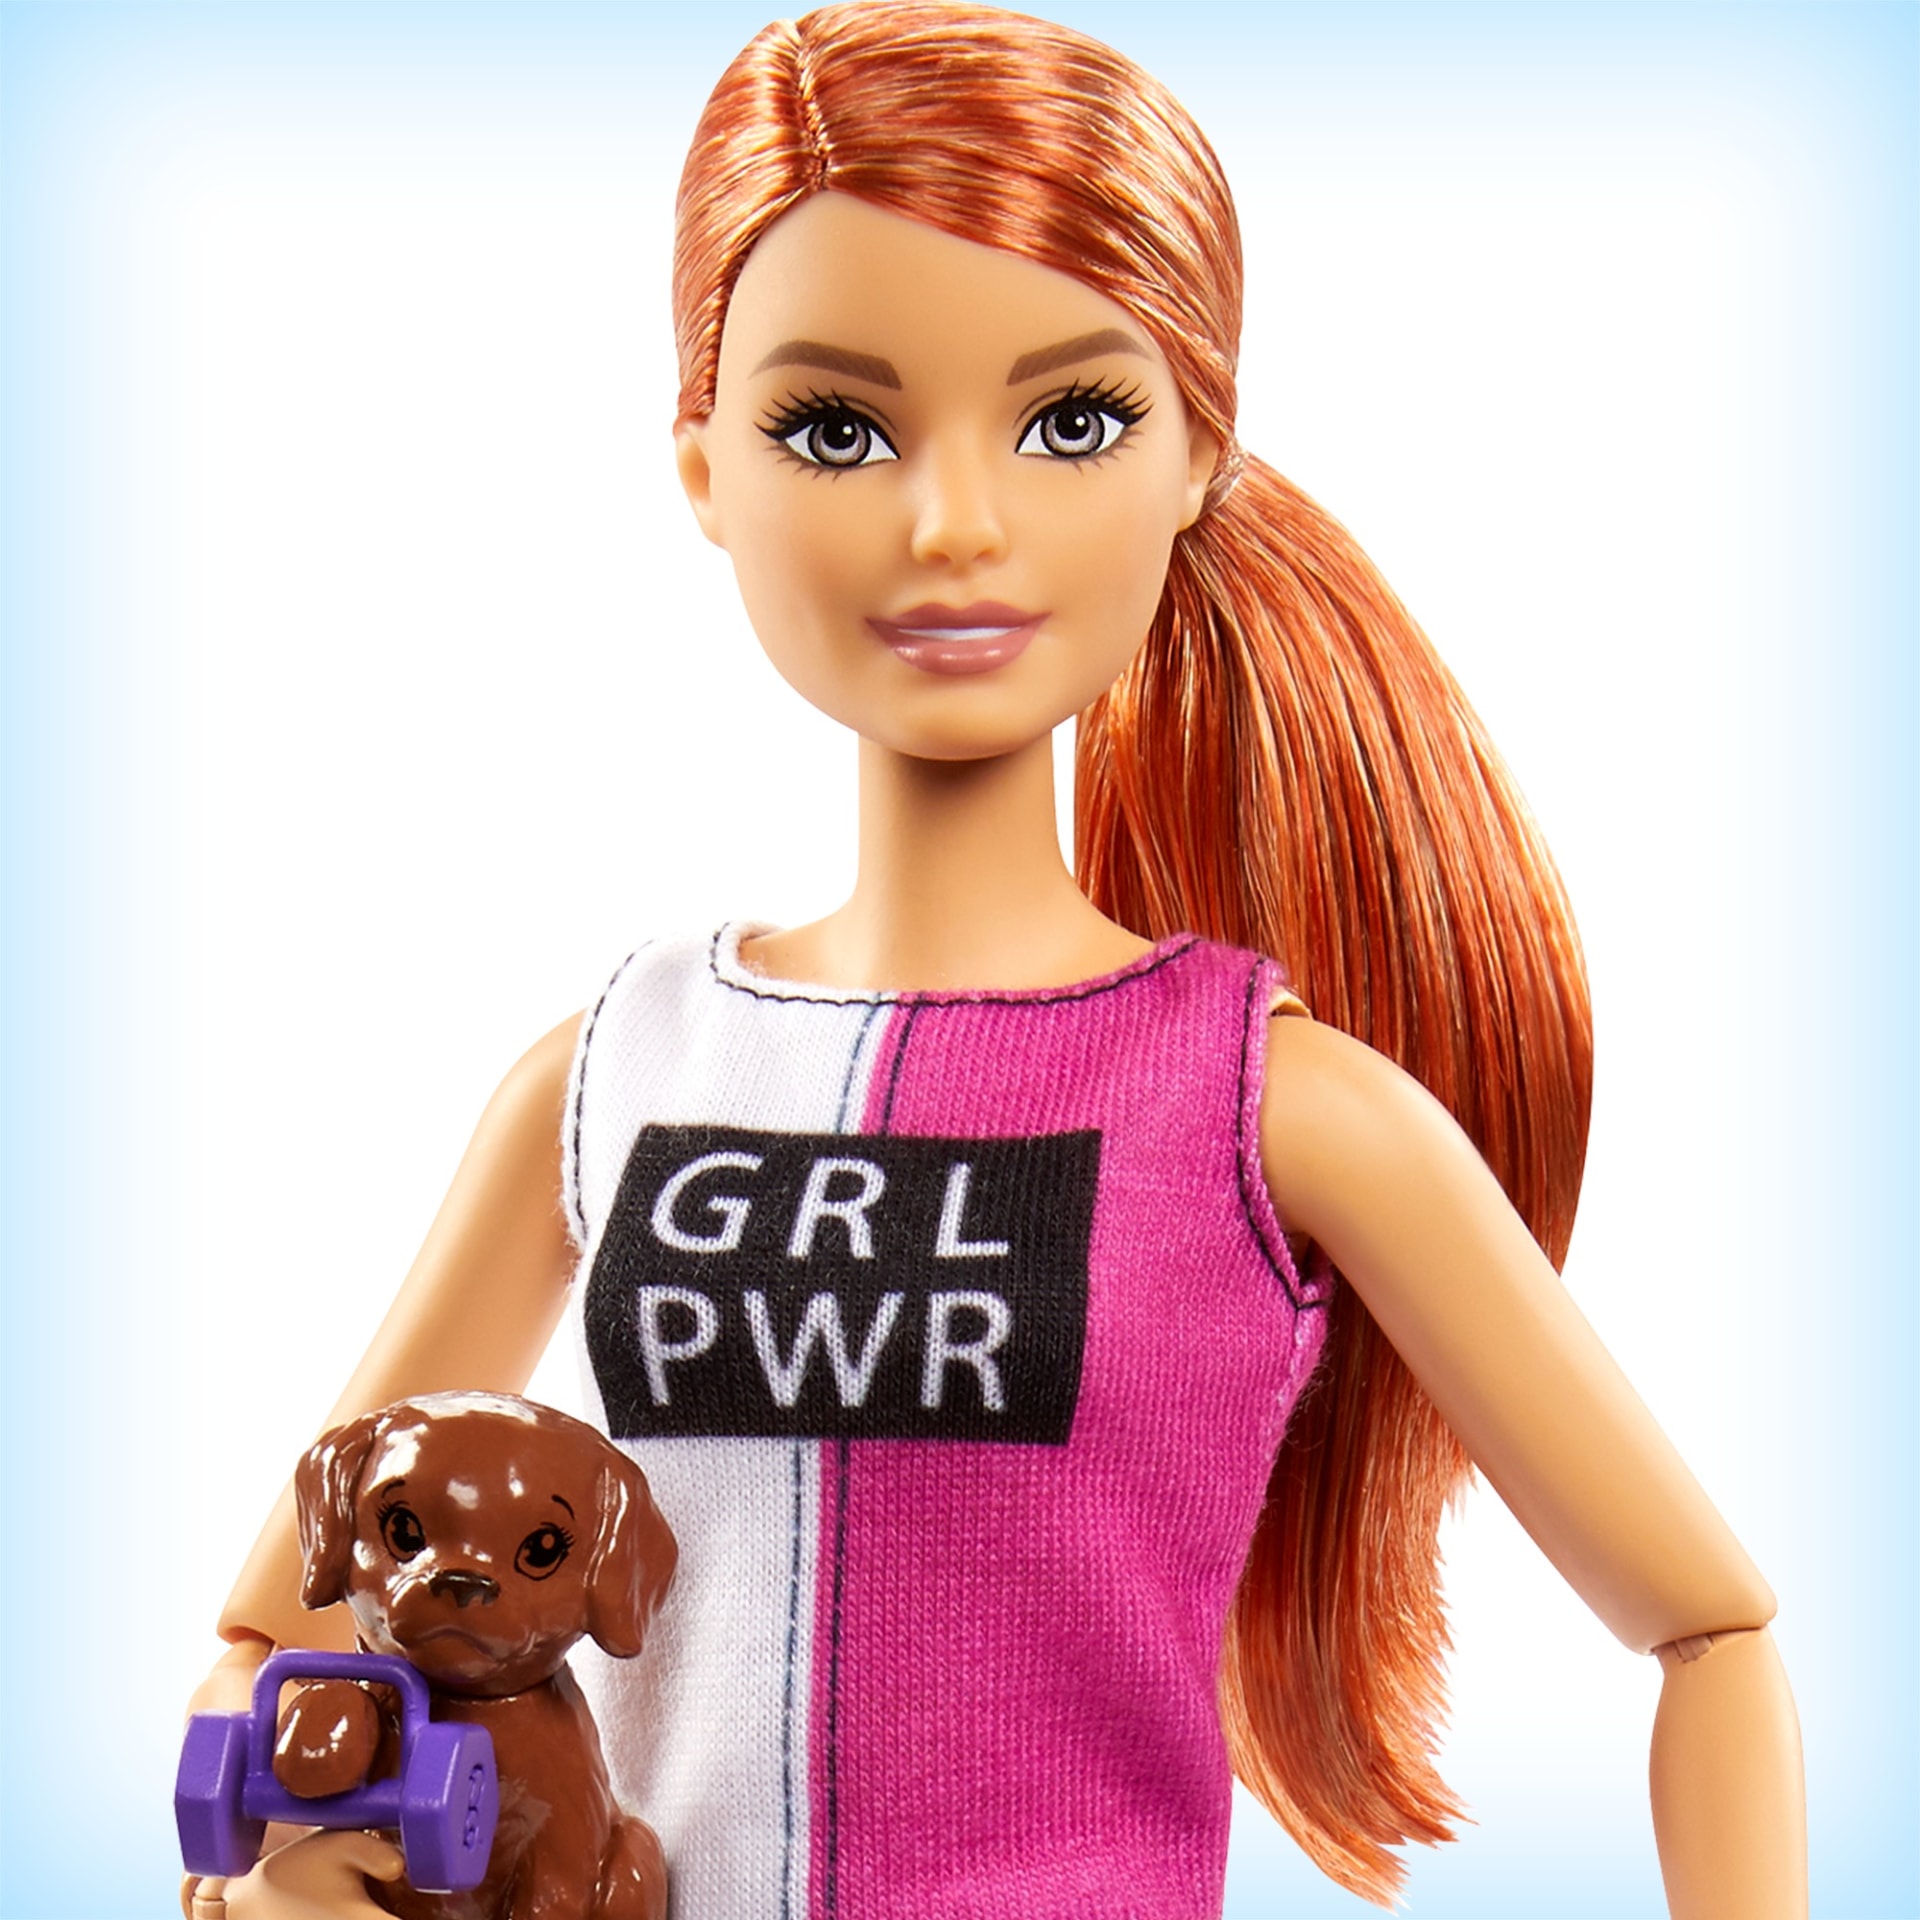 Barbie Fitness Doll, Red-Haired 9 Accessories GJG57 - ToysChoose